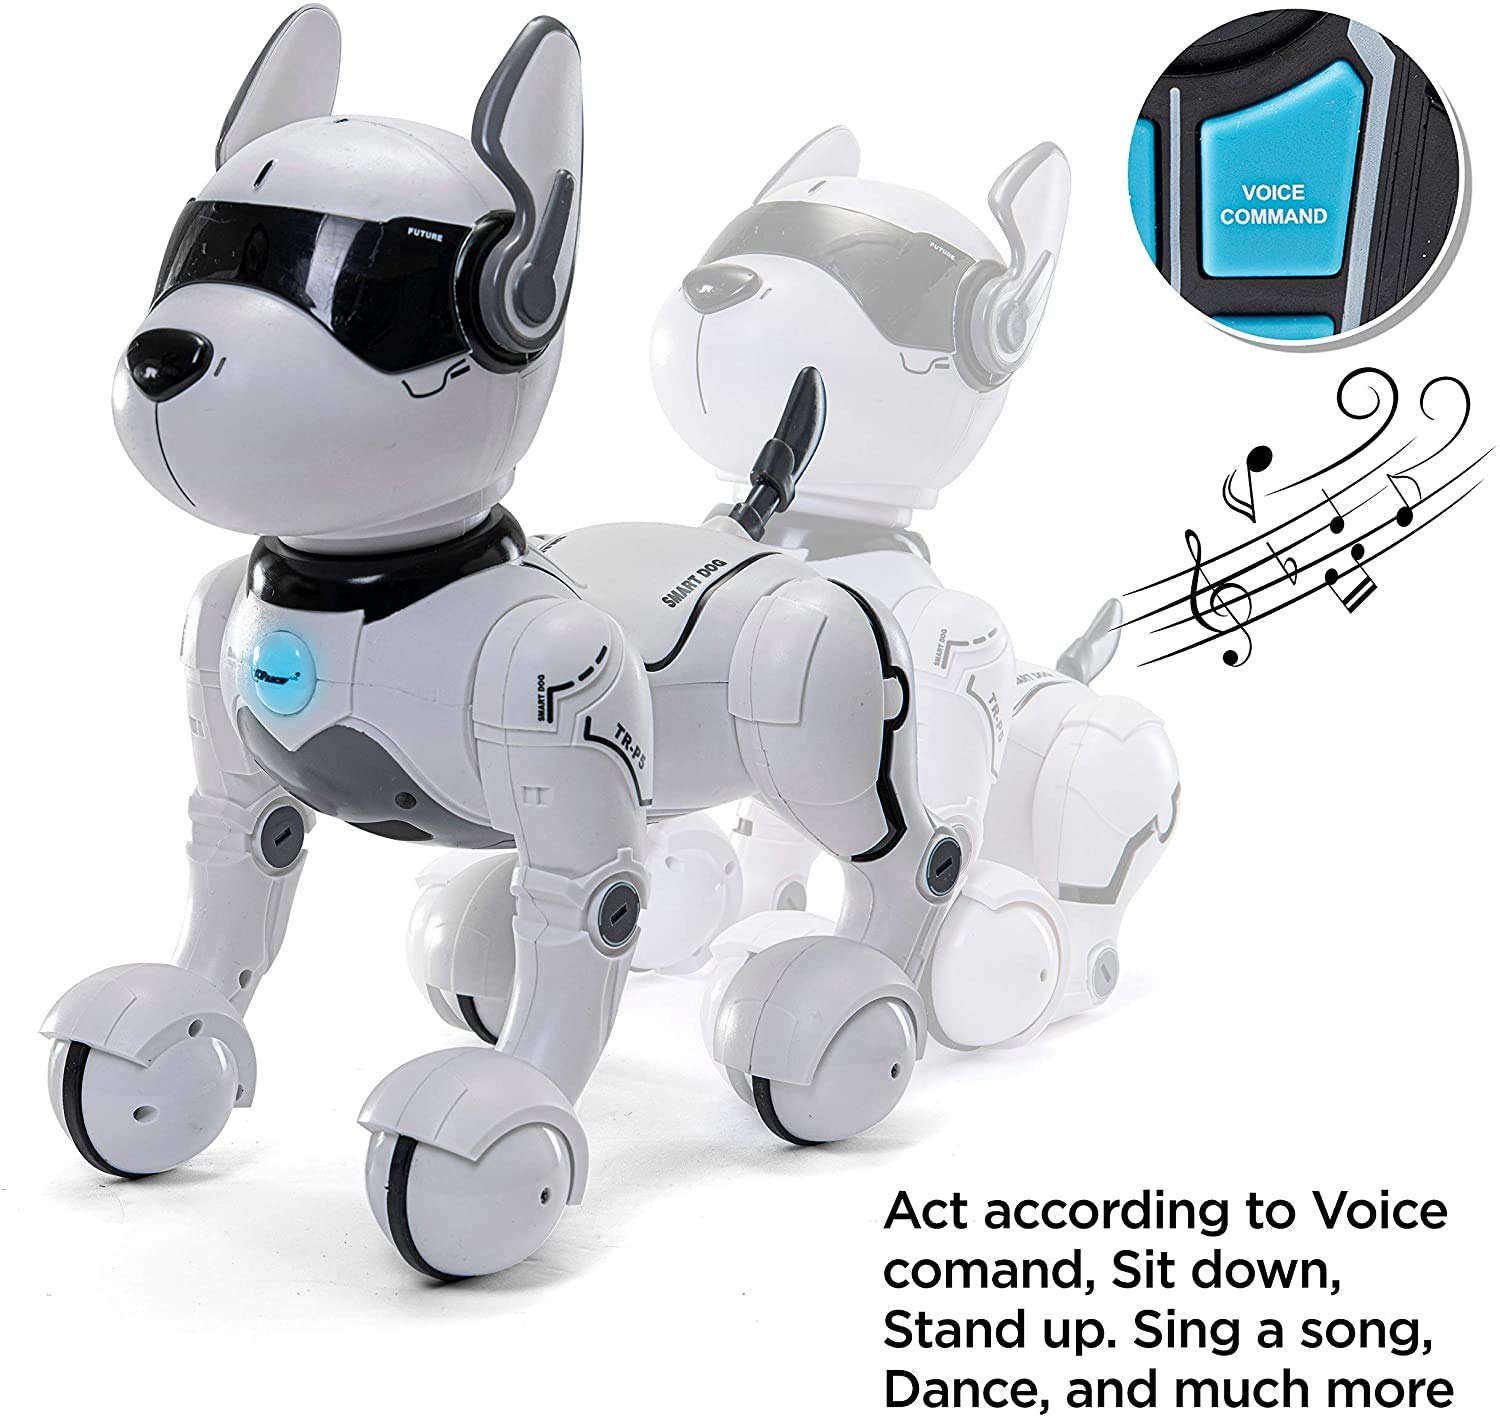 Remote Control Robot Dog Toy, Robots for Kids, Rc Dog Robot Toys for Kids 3,4,5,6,7,8,9,10 Year Old and up, Smart & Dancing Robot Toy, Imitates Animals Mini Pet Dog Robot…